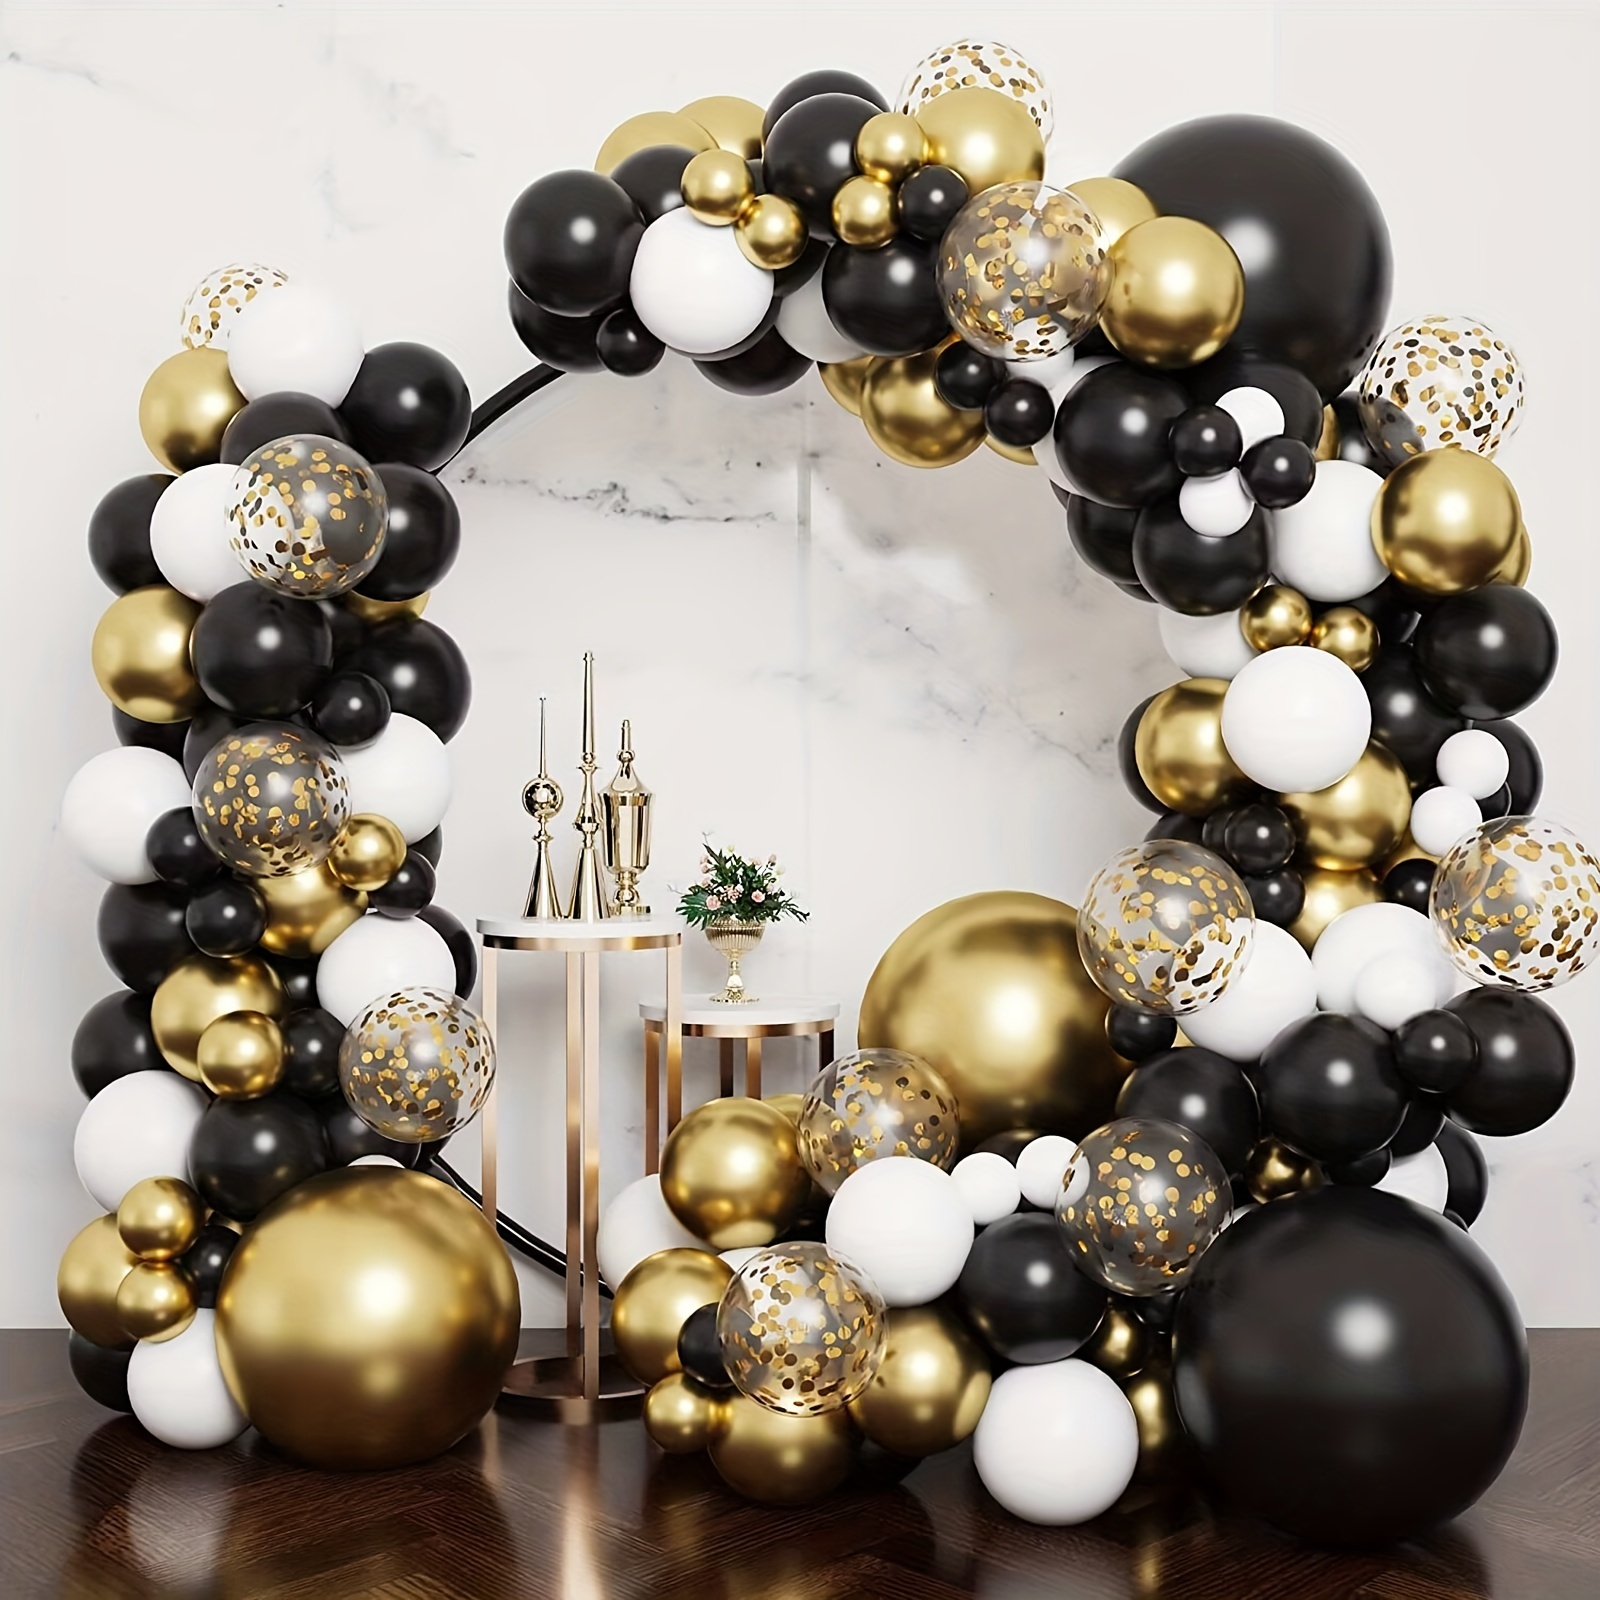 

131pcs, 5in 10in 12in 18in Black White And Golden Balloons Garland Arch Kit, Black Metal Golden And Metallic Confetti Gold Balloons For Graduation Party Baby Shower Wedding Birthday Anniversary